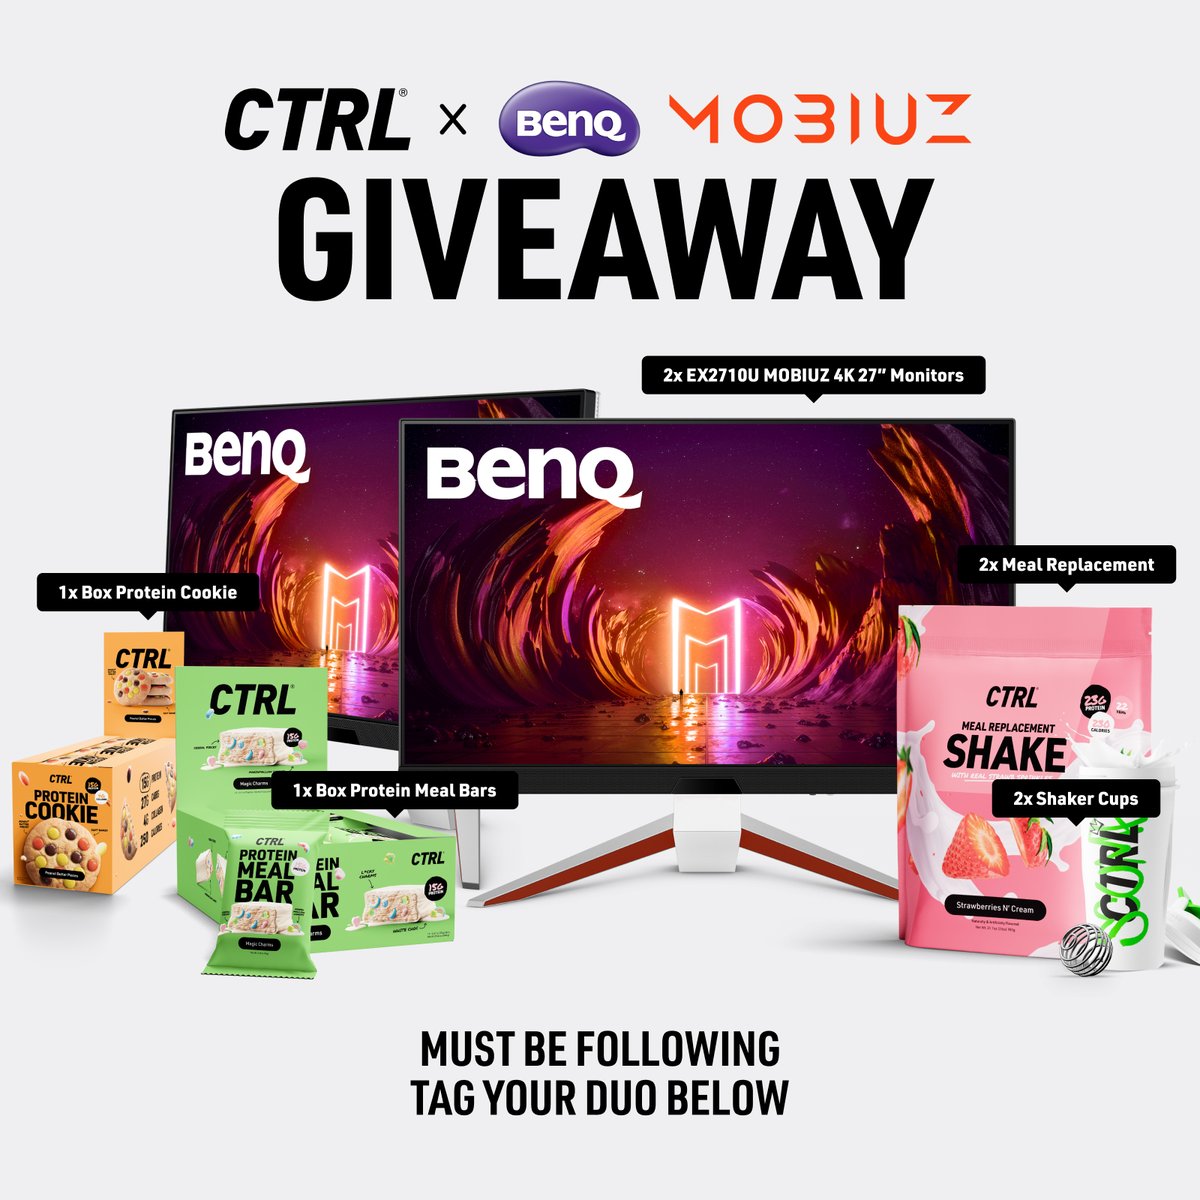 🌟Join the CTRL x BenQ MOBIUZ New Year's Resolution Giveaway🌟 We've teamed up with @DrinkCTRL to kickstart your year right! Prizes: 🖥️ 2x #EX2710U 4K #MOBIUZ Gaming Monitors 🍔 2x Meal Replacement Shakes 🍪 2x Boxes of Protein Cookies 🍫 2x Boxes of Meal Bars 🥤 2x Shaker Cups